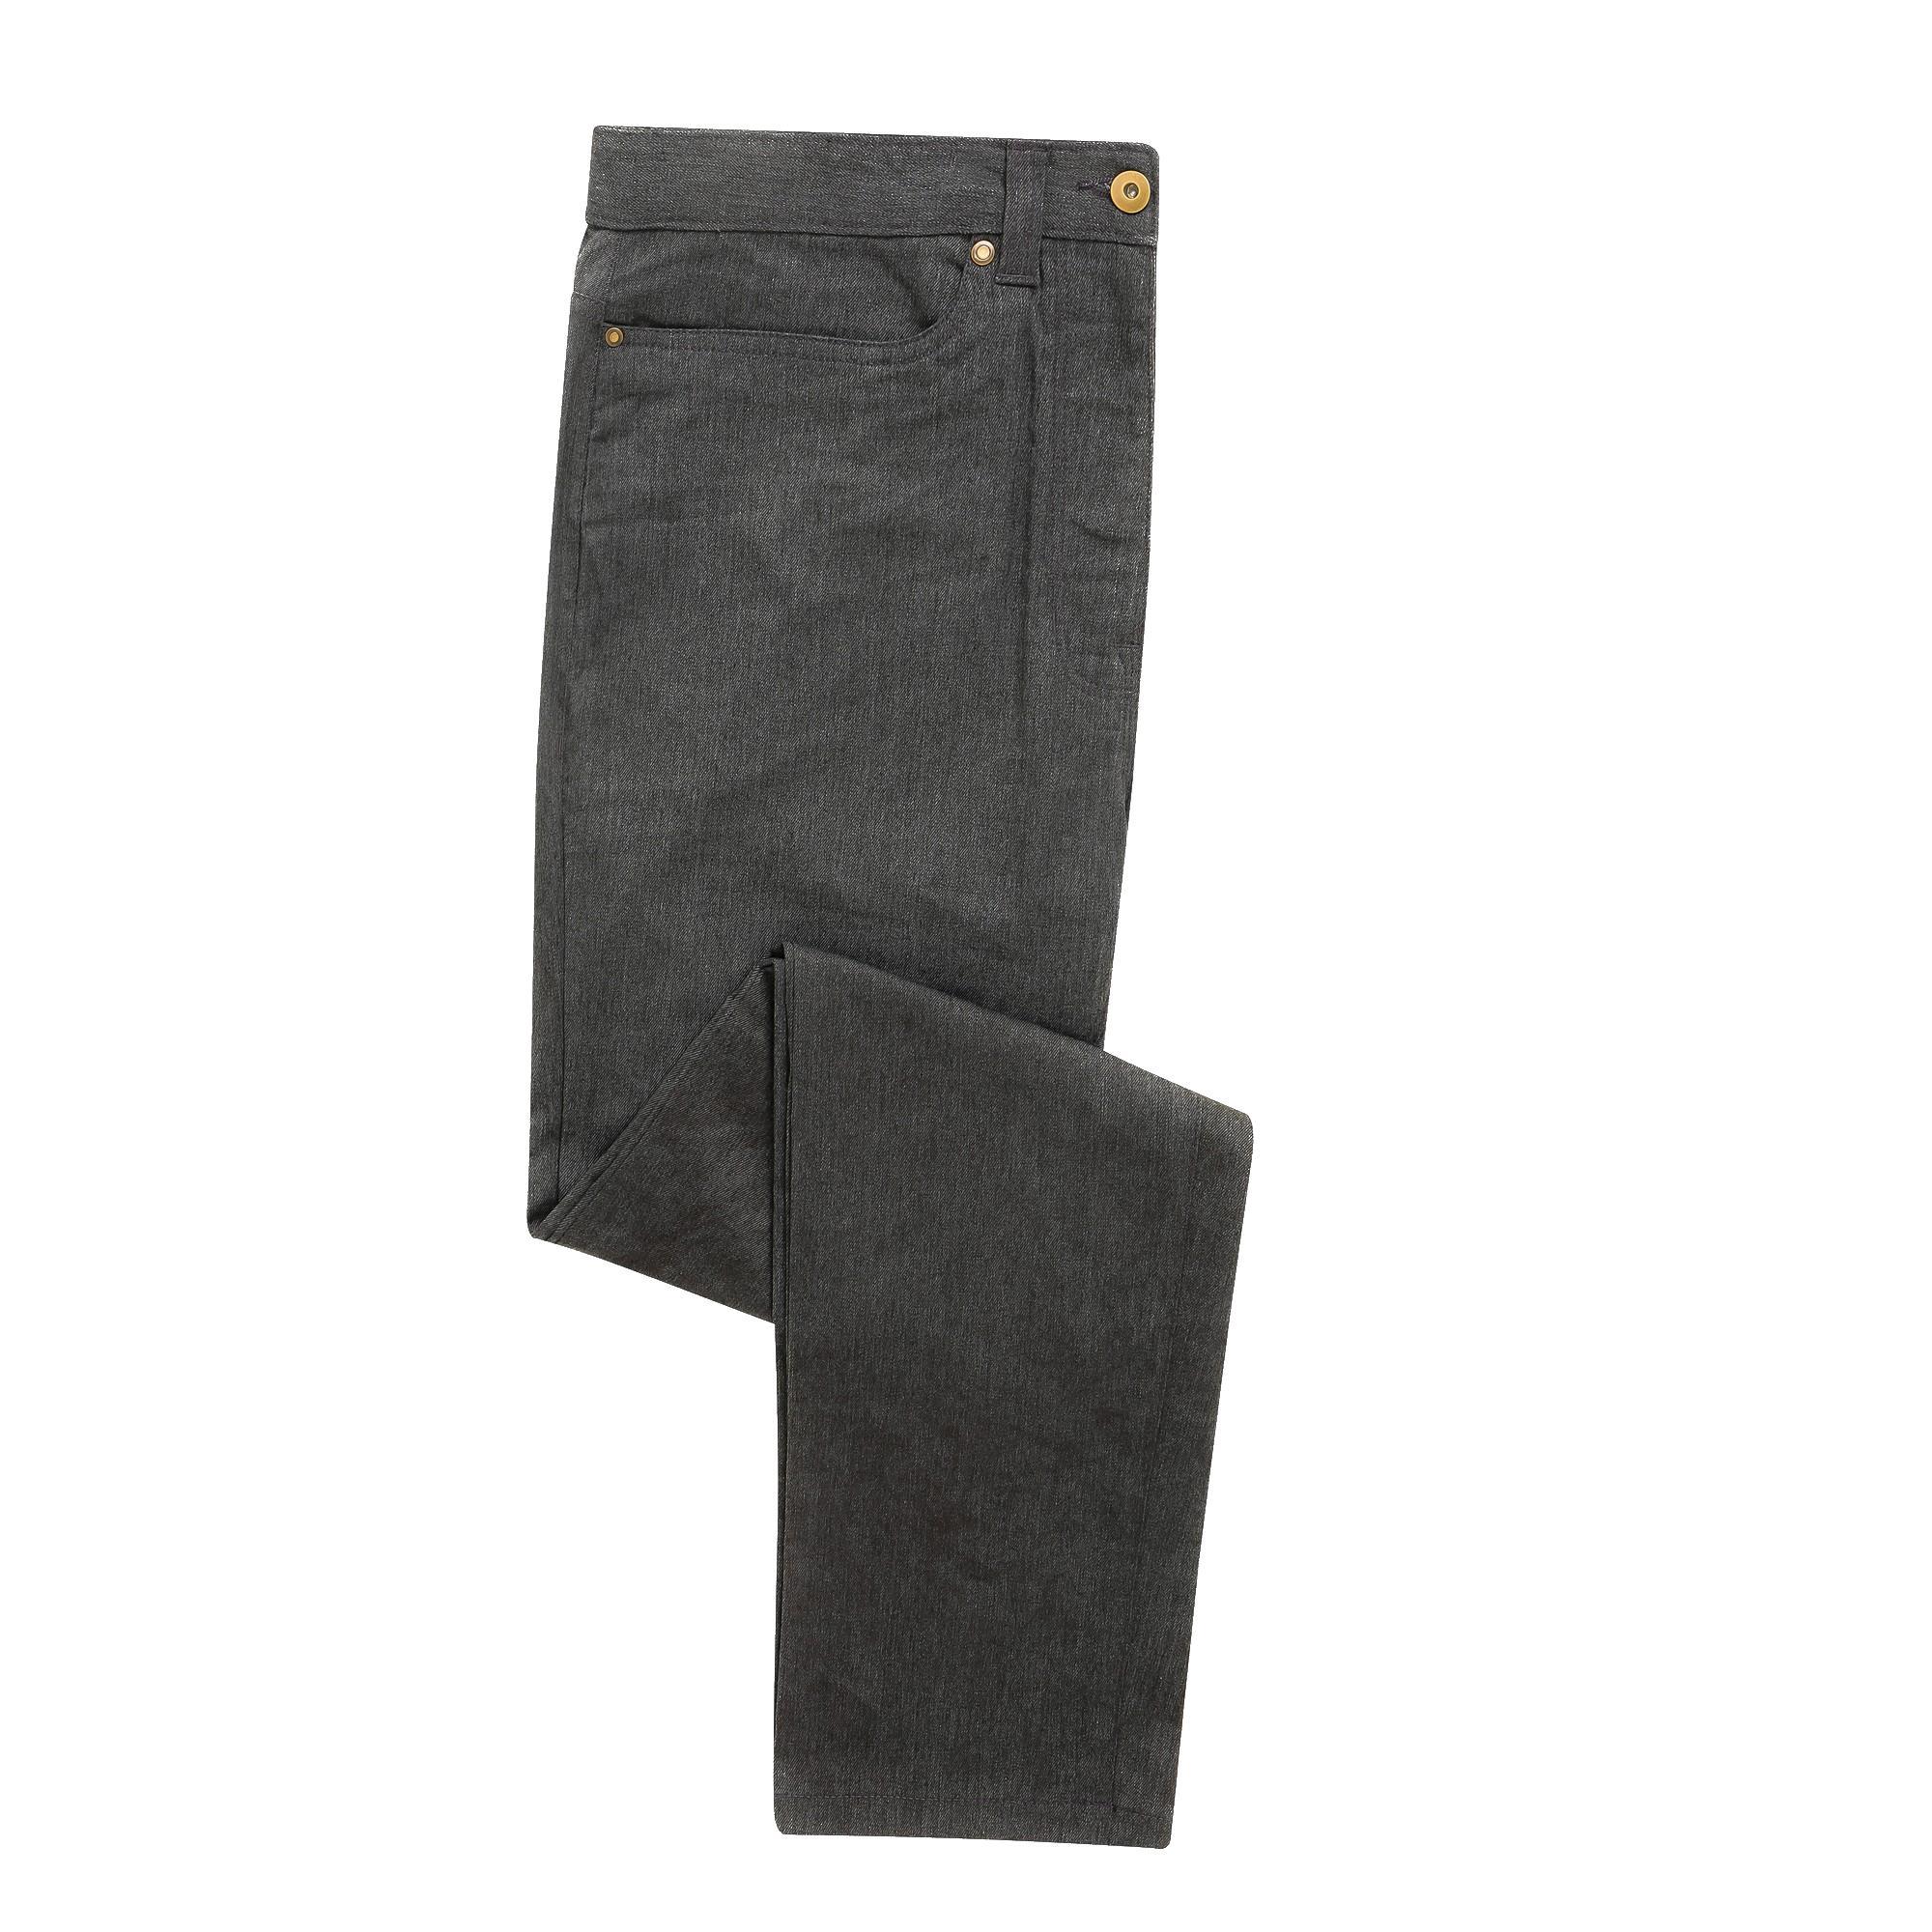 Premier Mens Performance Chinos (Charcoal) (32L)